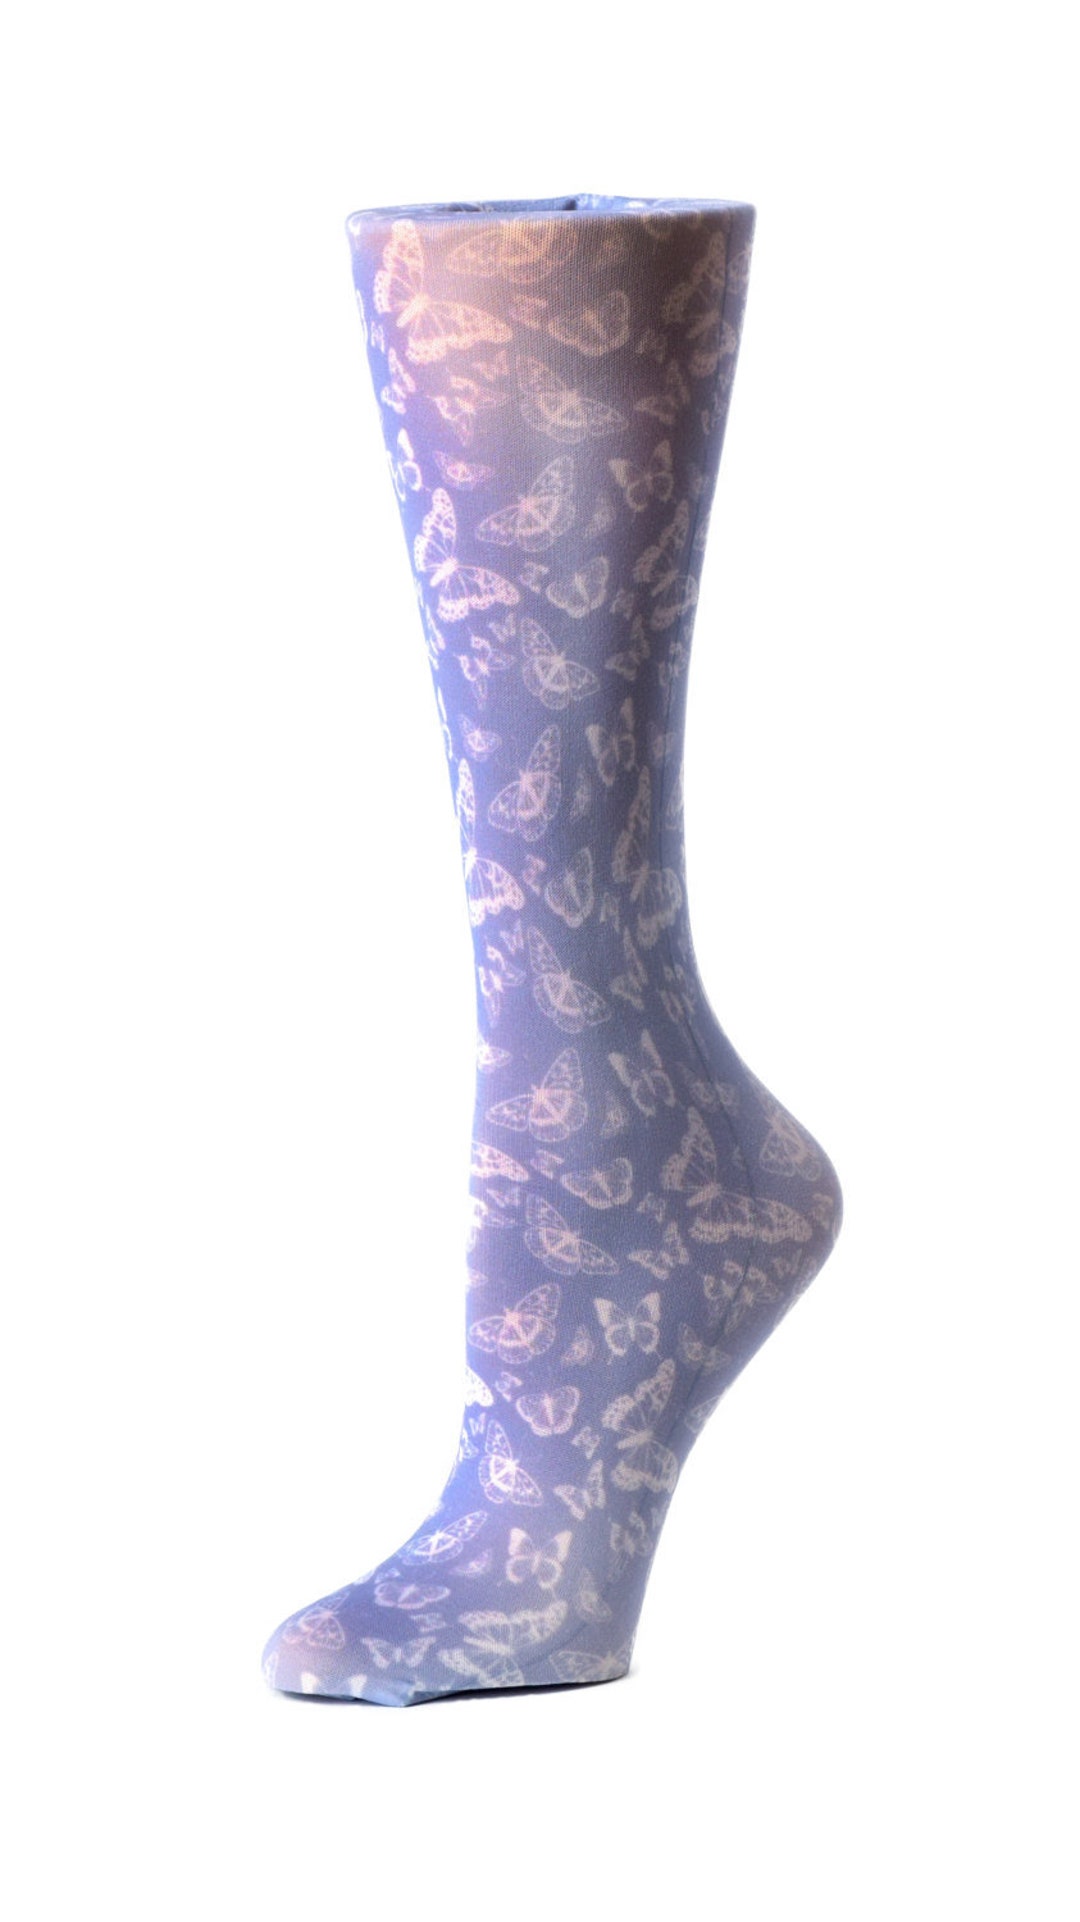 Cutieful Therapeutic Compression Socks White Butterflies - Etsy